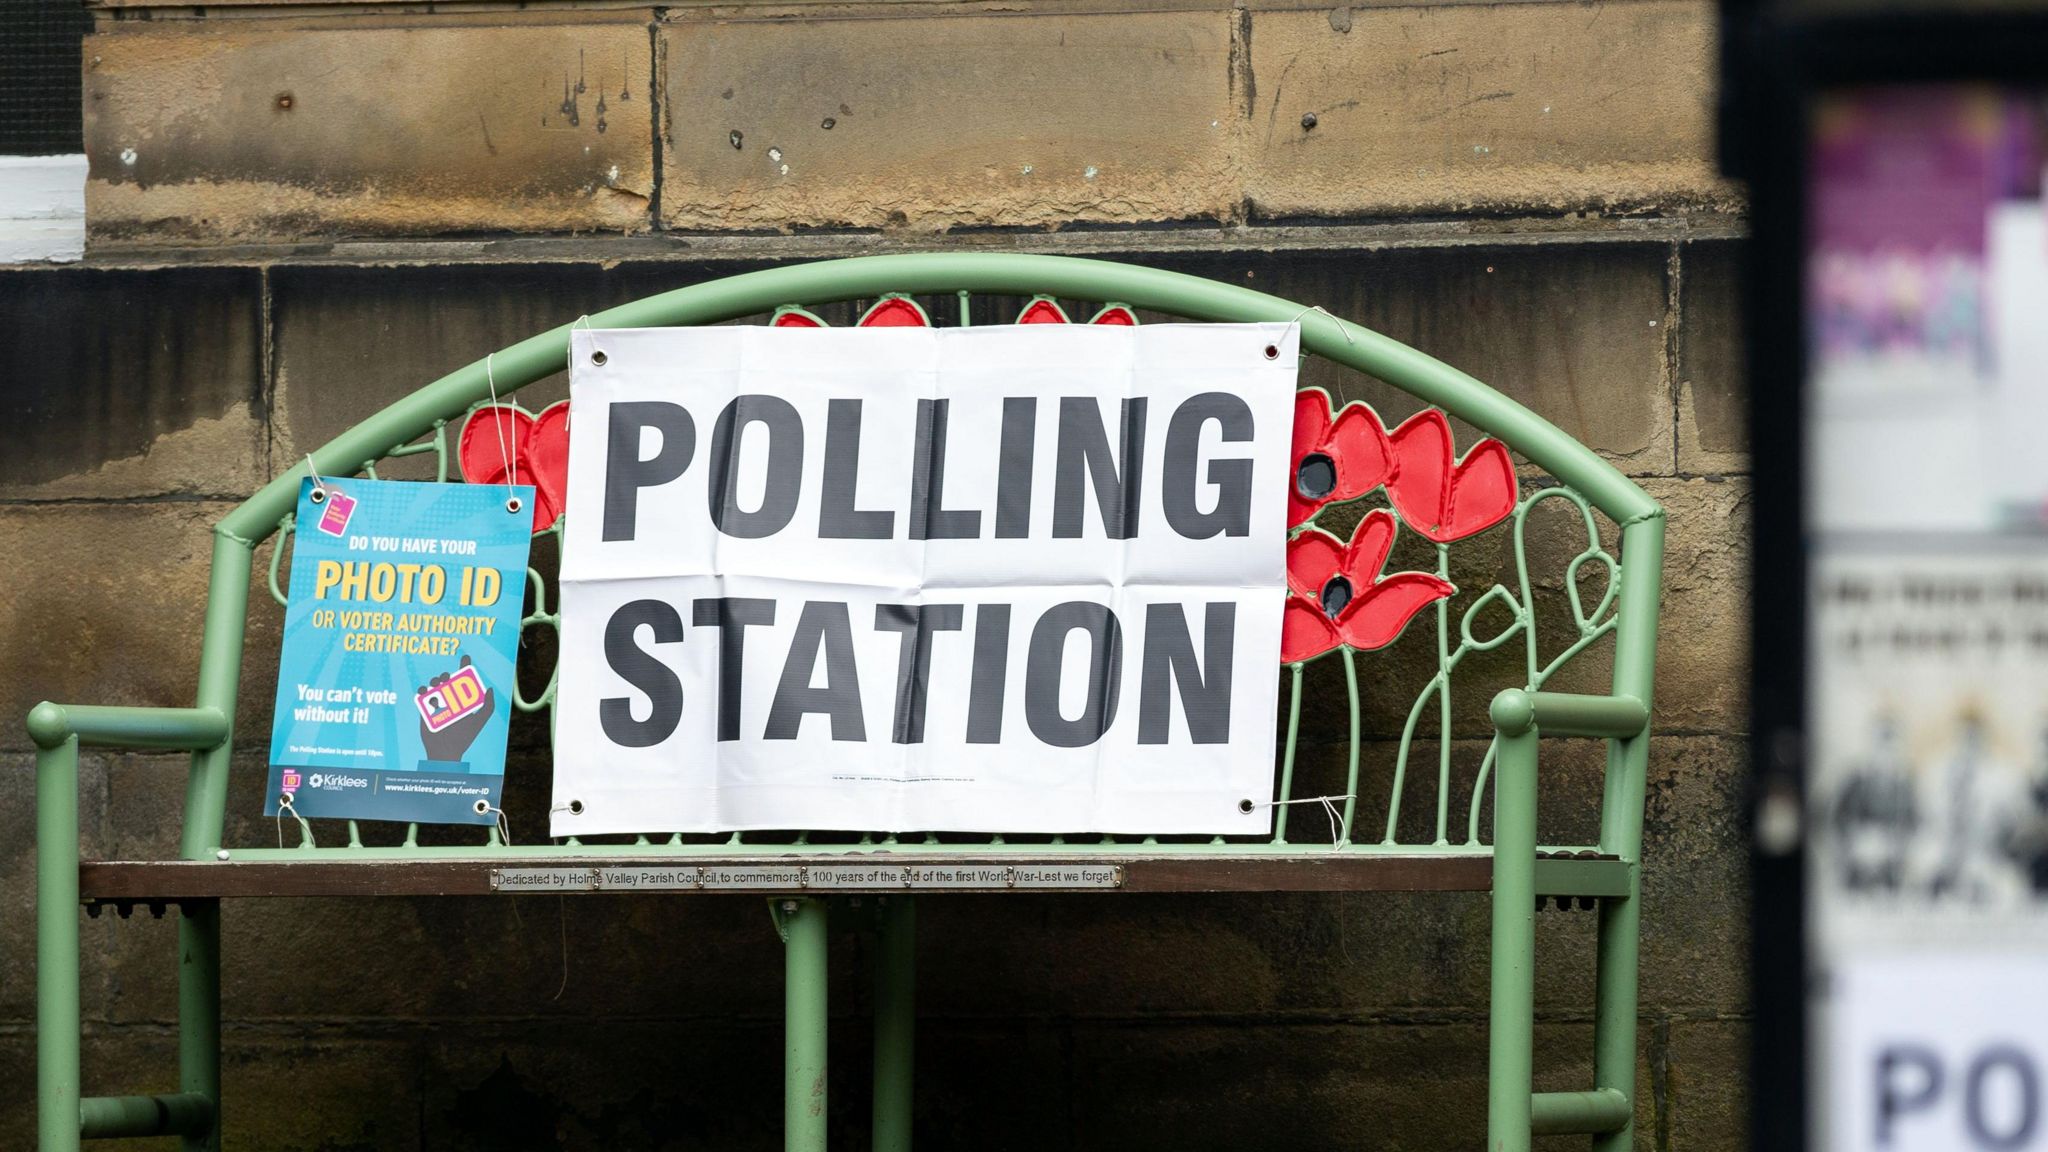 A poster reminds voters to bring photo ID at a polling station